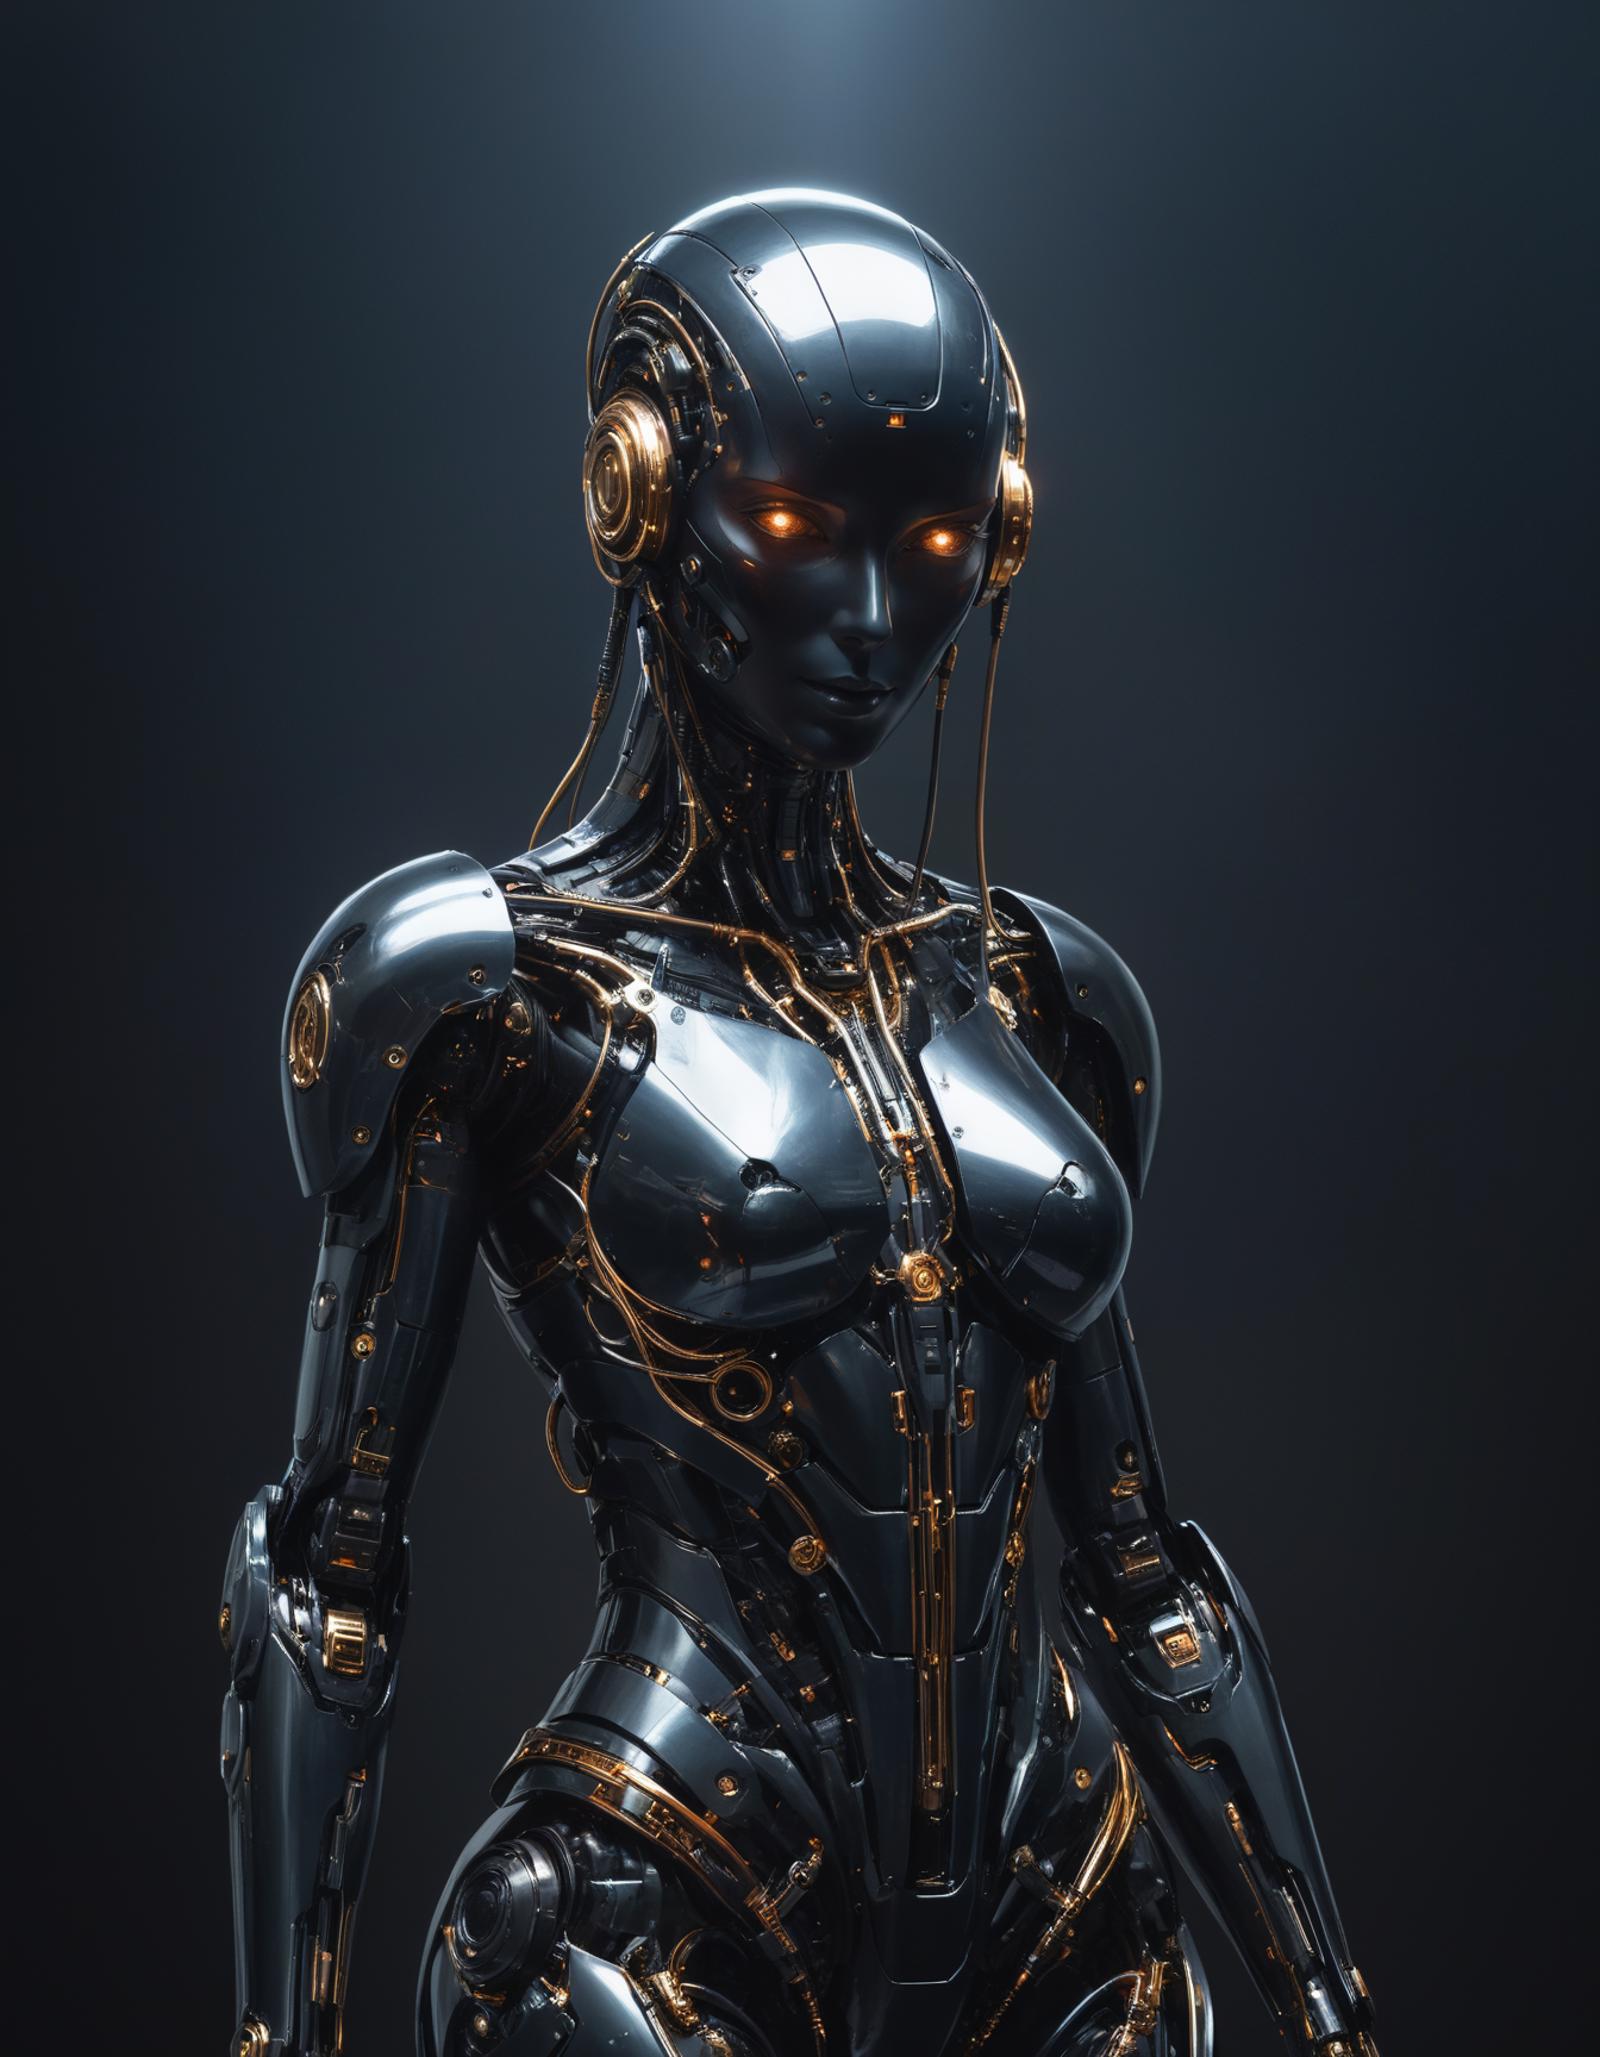 Robotic Woman with Gold Accents and Illuminated Eyes in a Black Background.